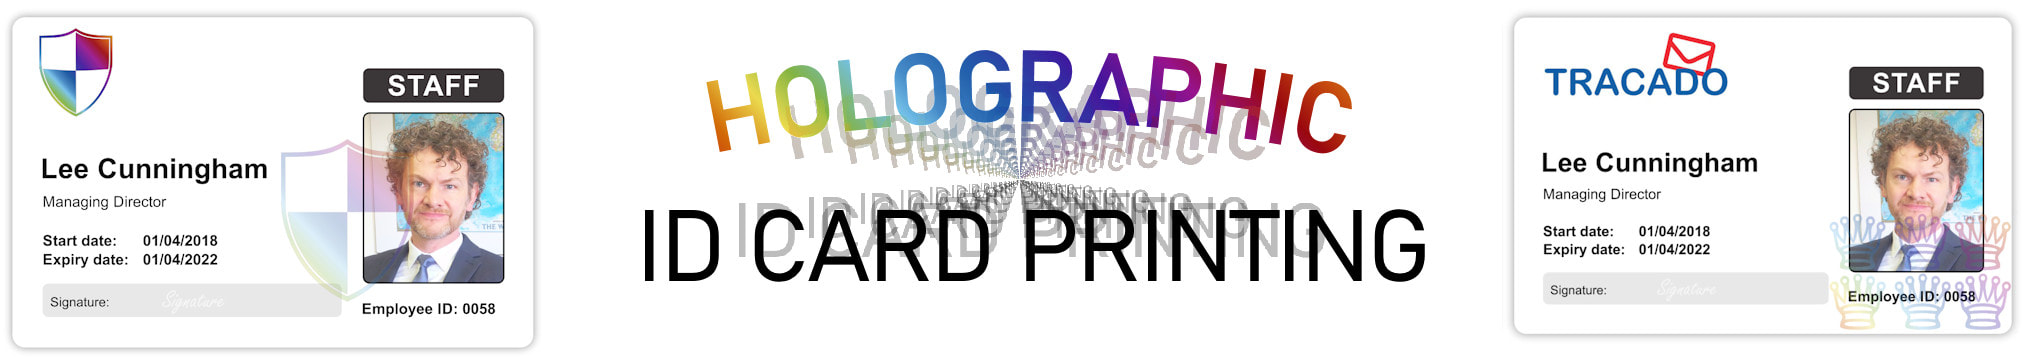 Dundee holographic ID card print service. Employee Identity cards with hologram or holograph security mark.